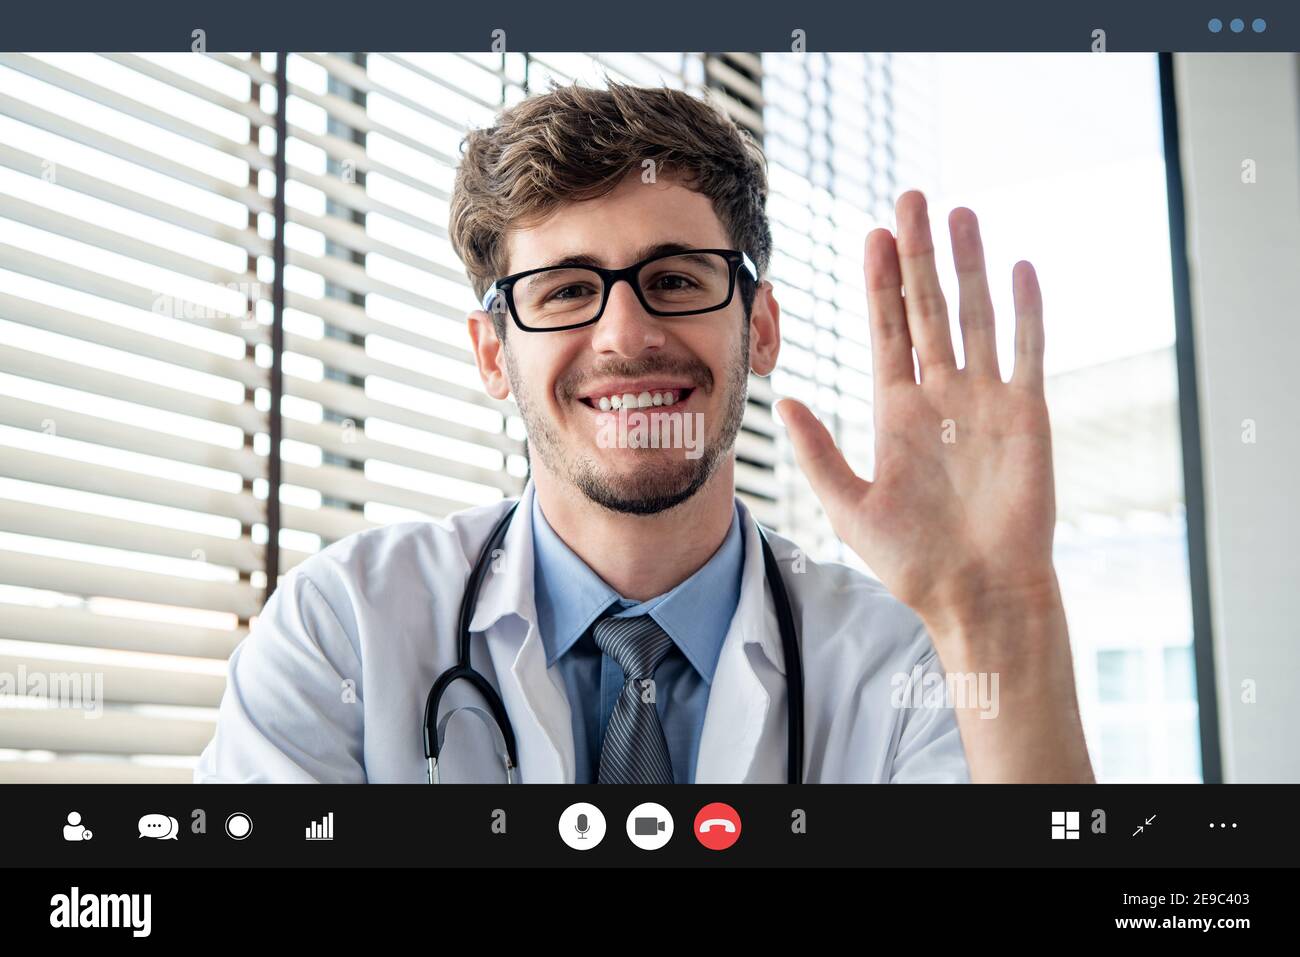 Young male doctor waving hand greeting patient online via video call, home medical consulation service concepts Stock Photo